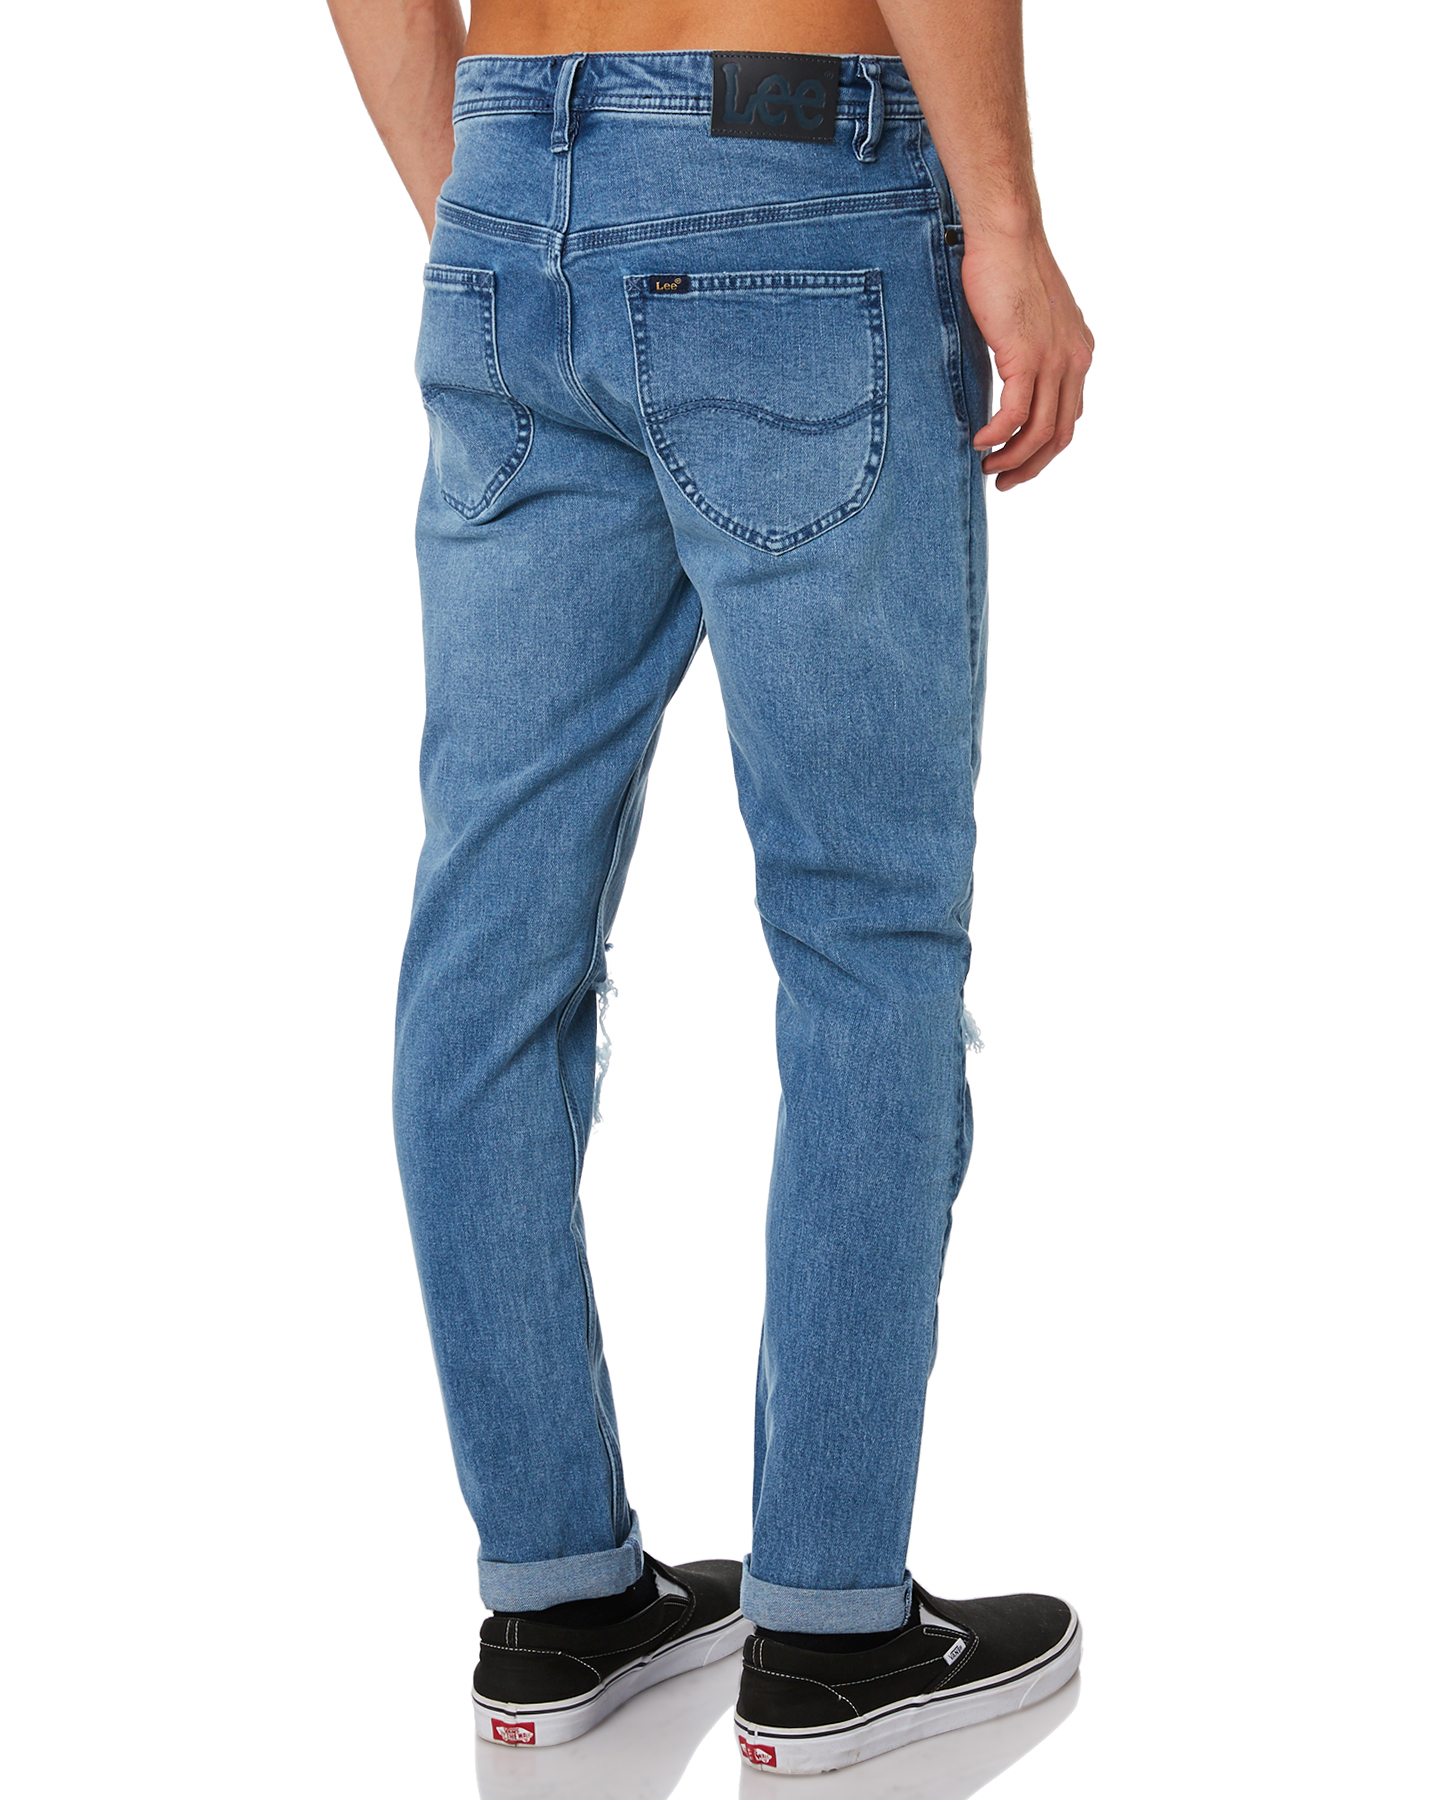 Lee Z-Two Roller Distressed Mens Jean - Hutch Stone | SurfStitch